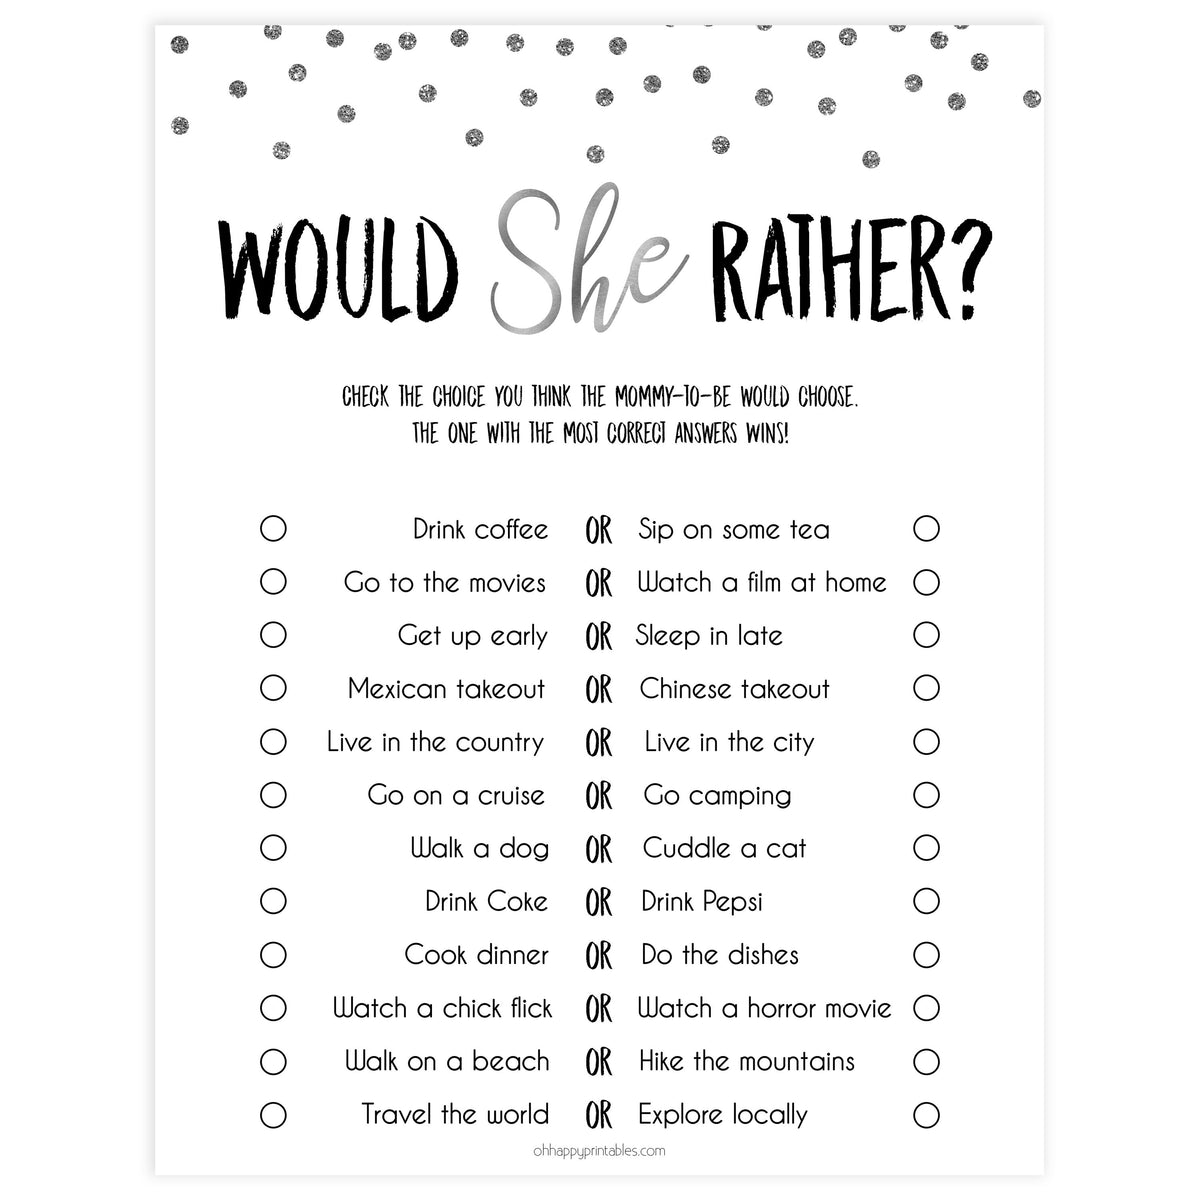 Would She Rather - Printable Rainbow Baby Shower Games